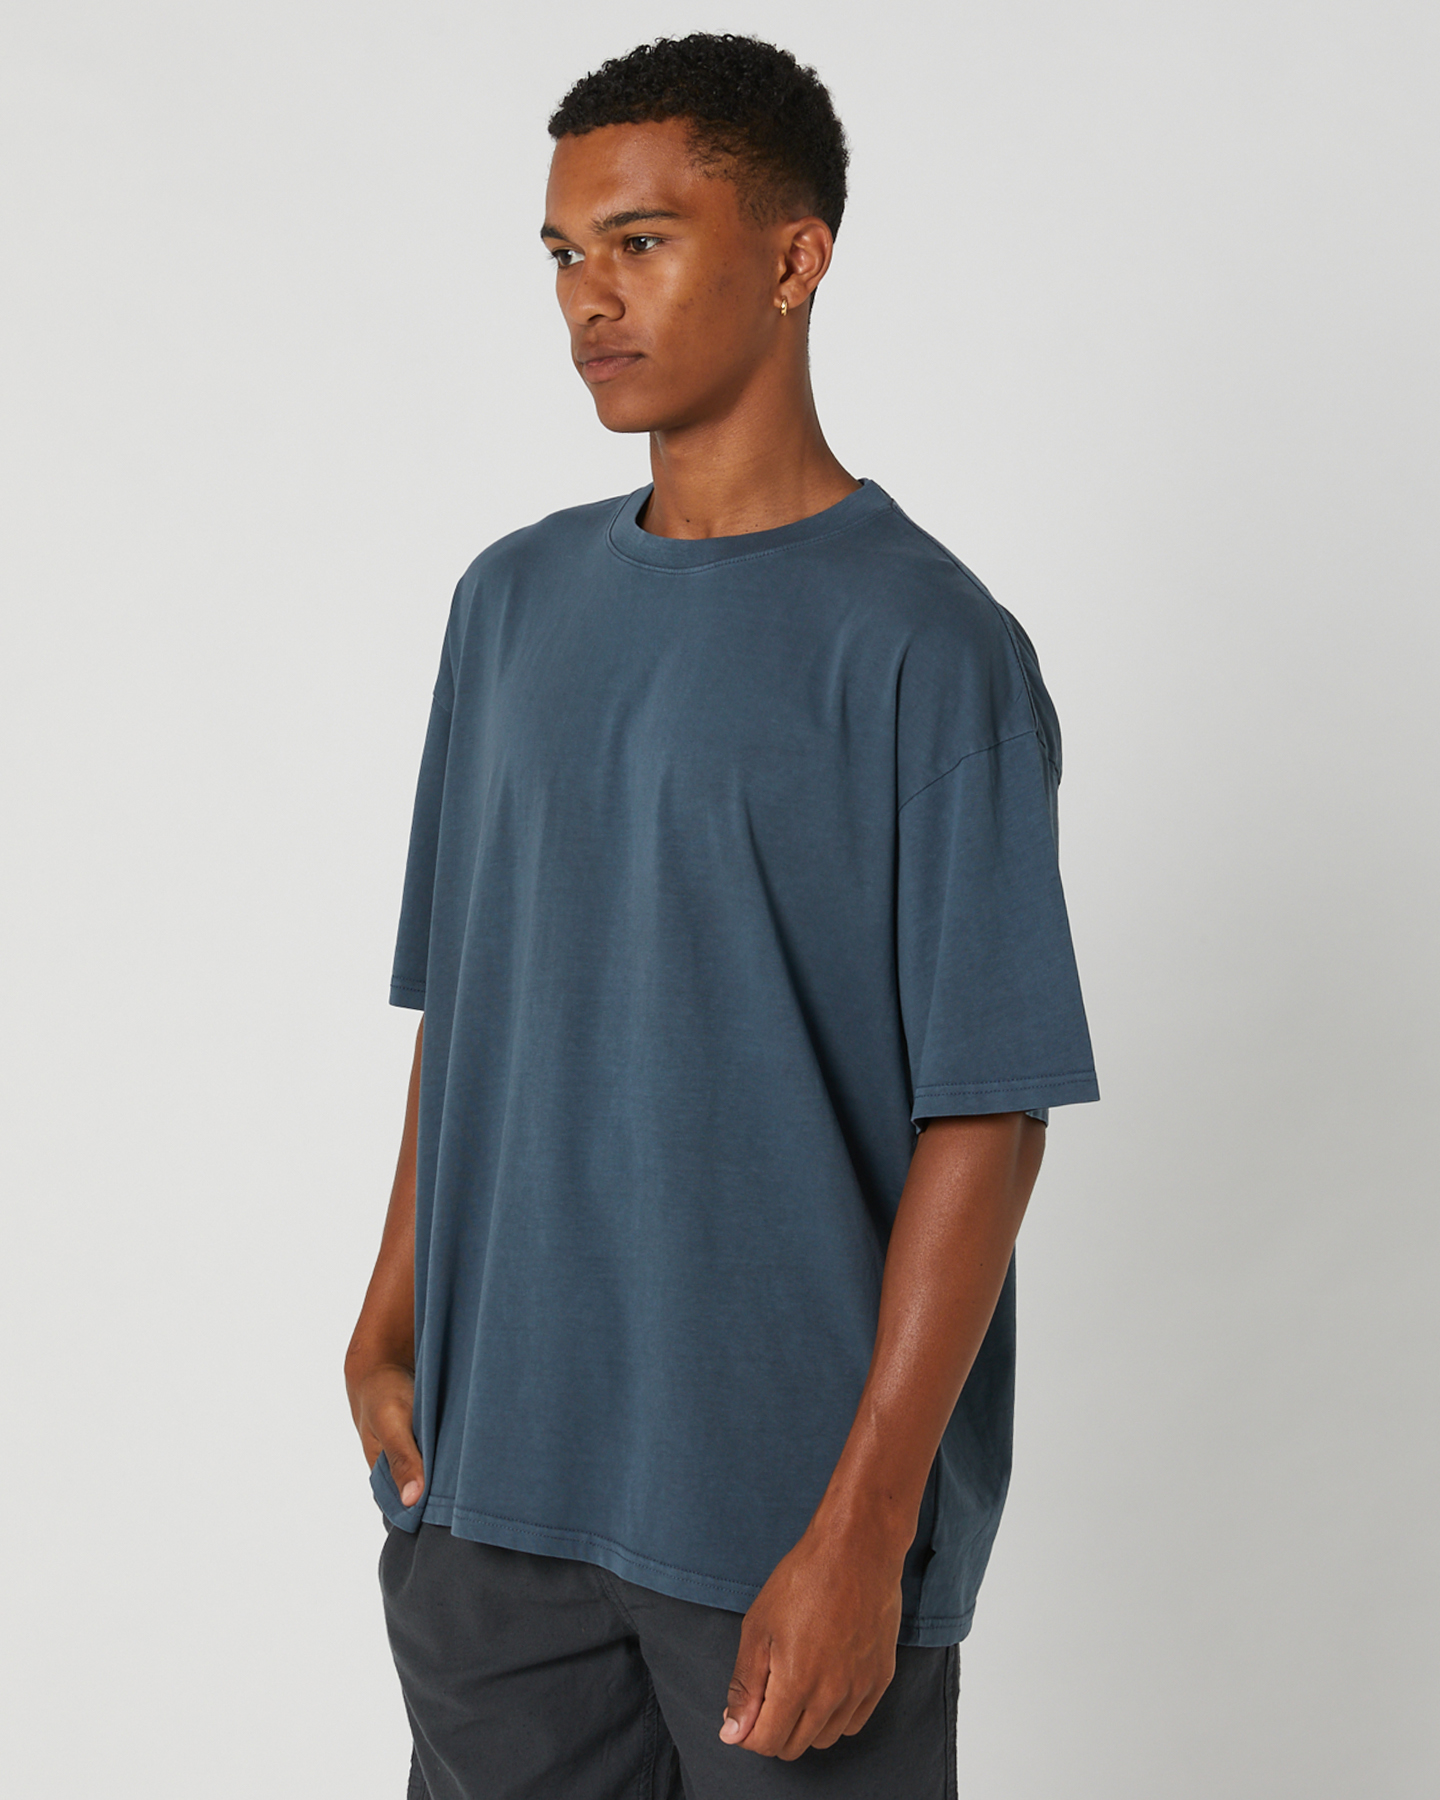 Silent Theory Oversized Tee - Navy | SurfStitch